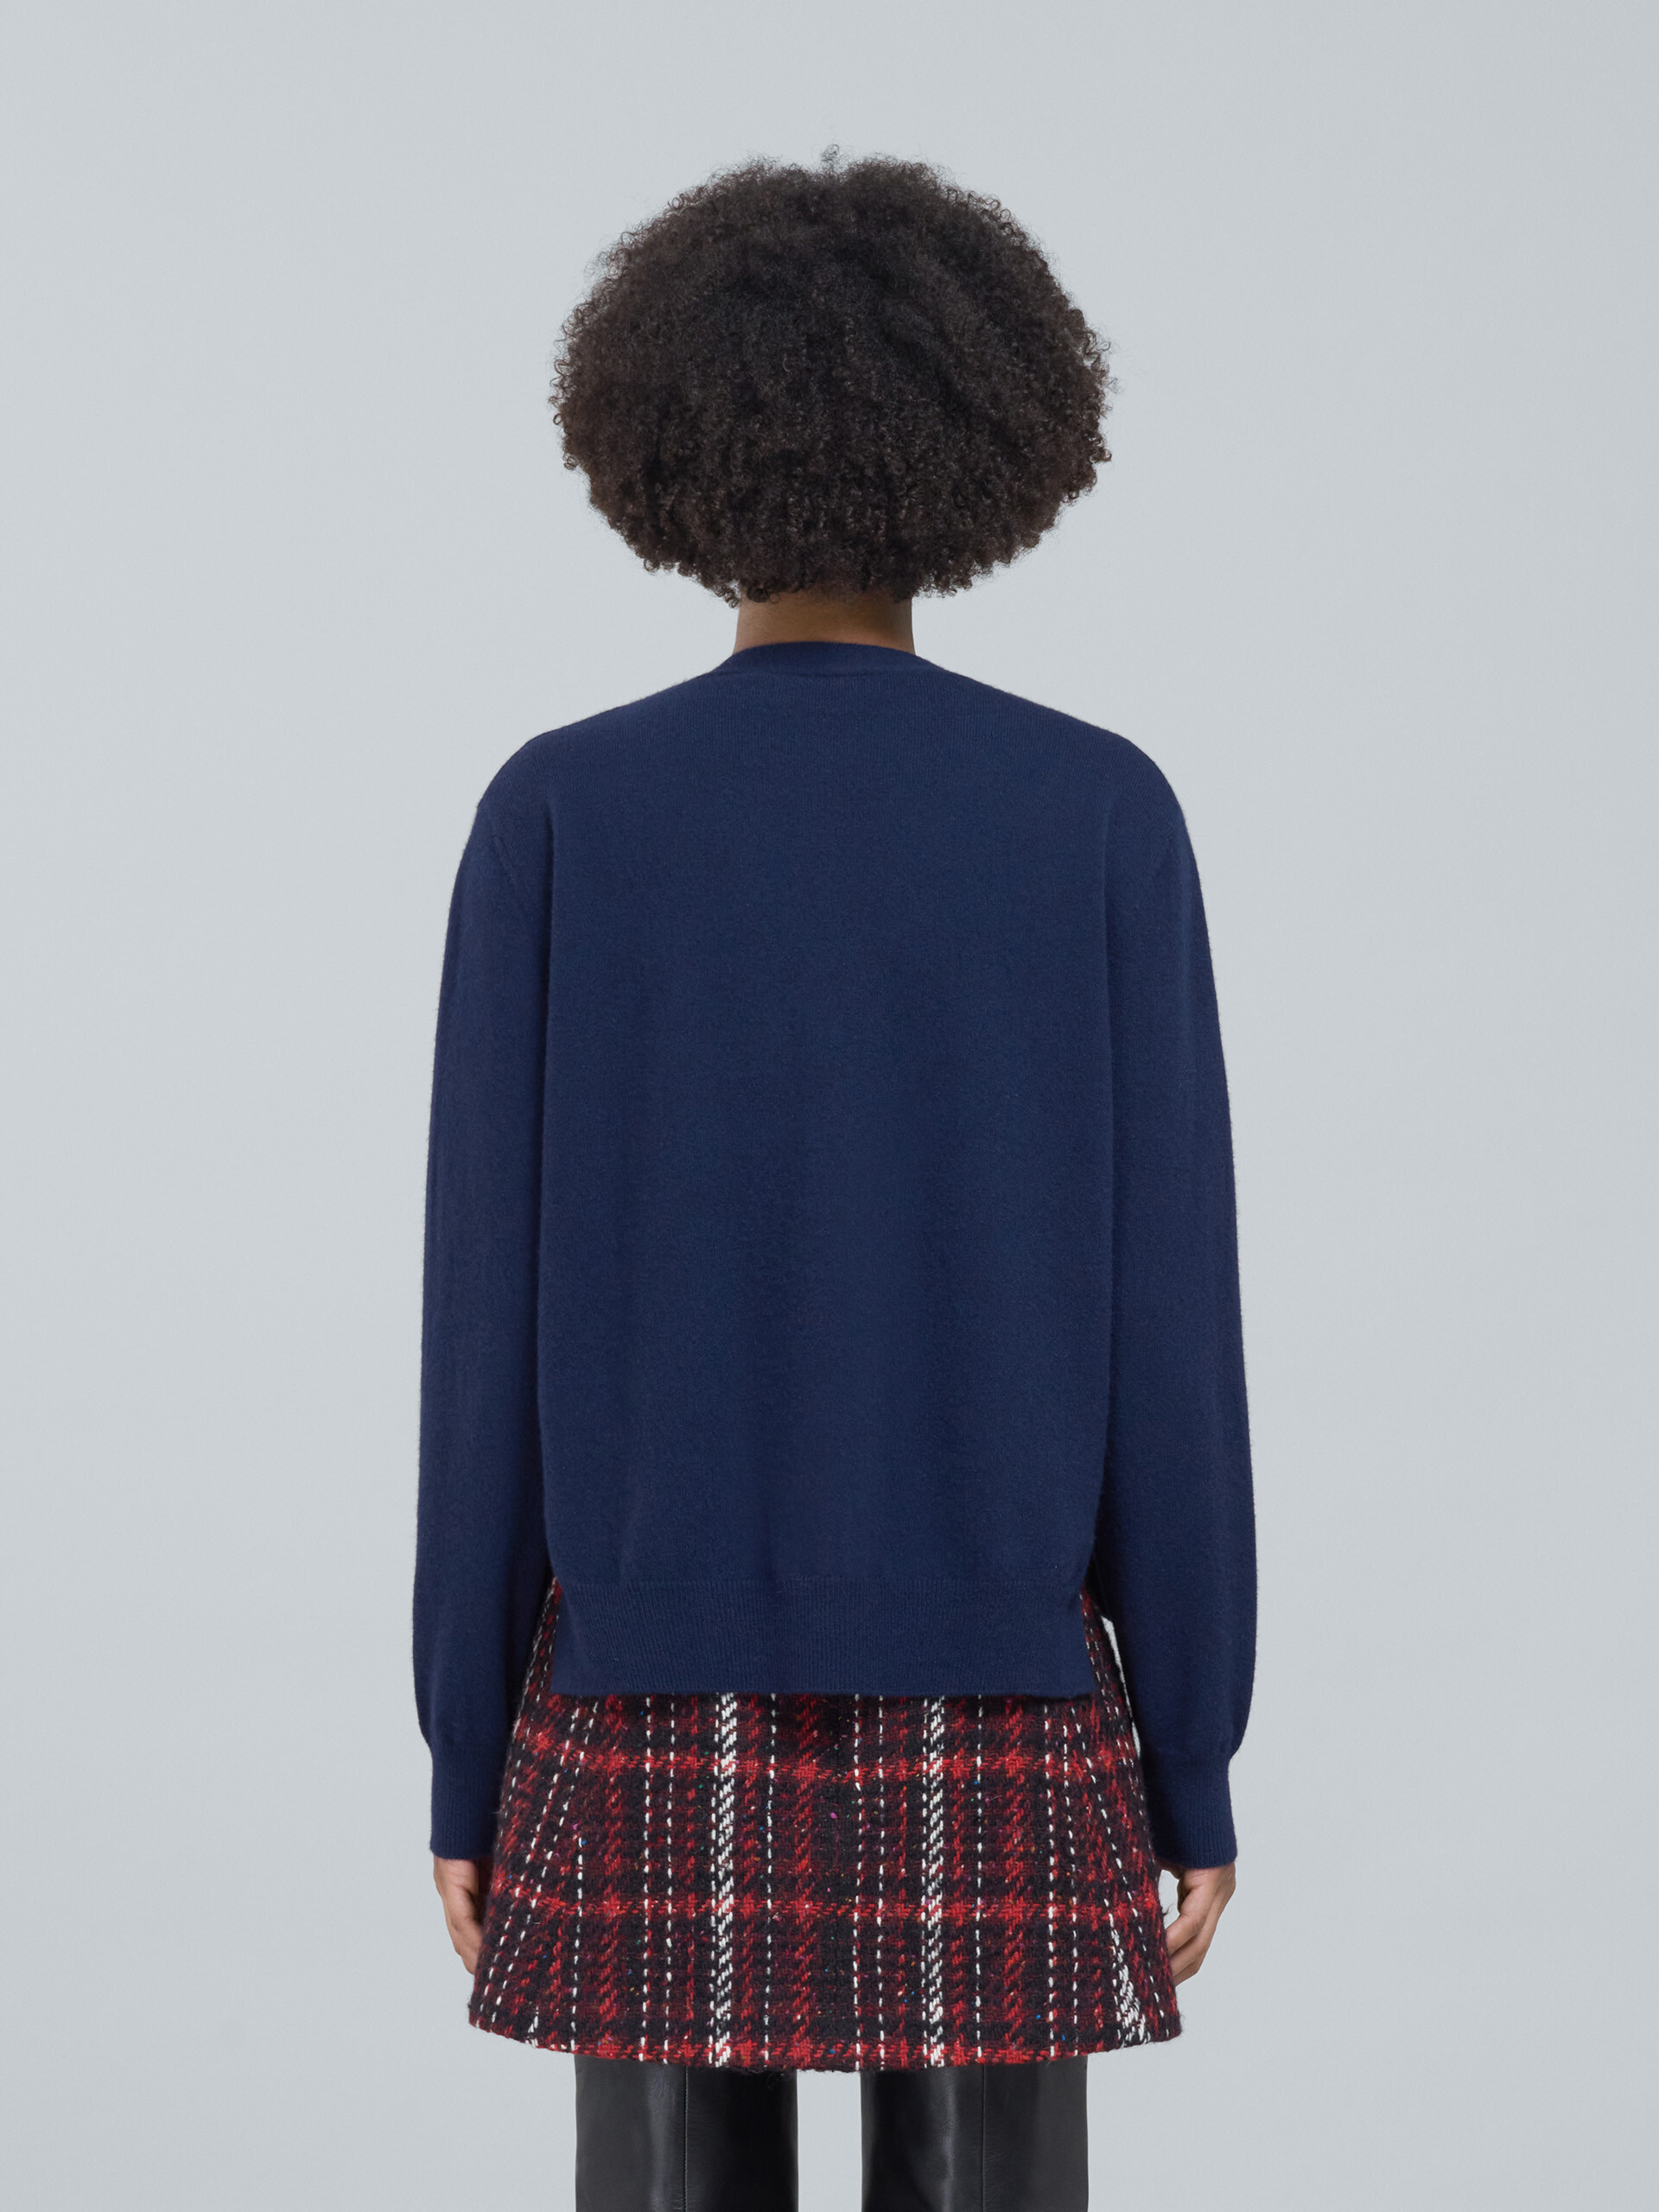 Cashmere cardigan - Pullovers - Image 3